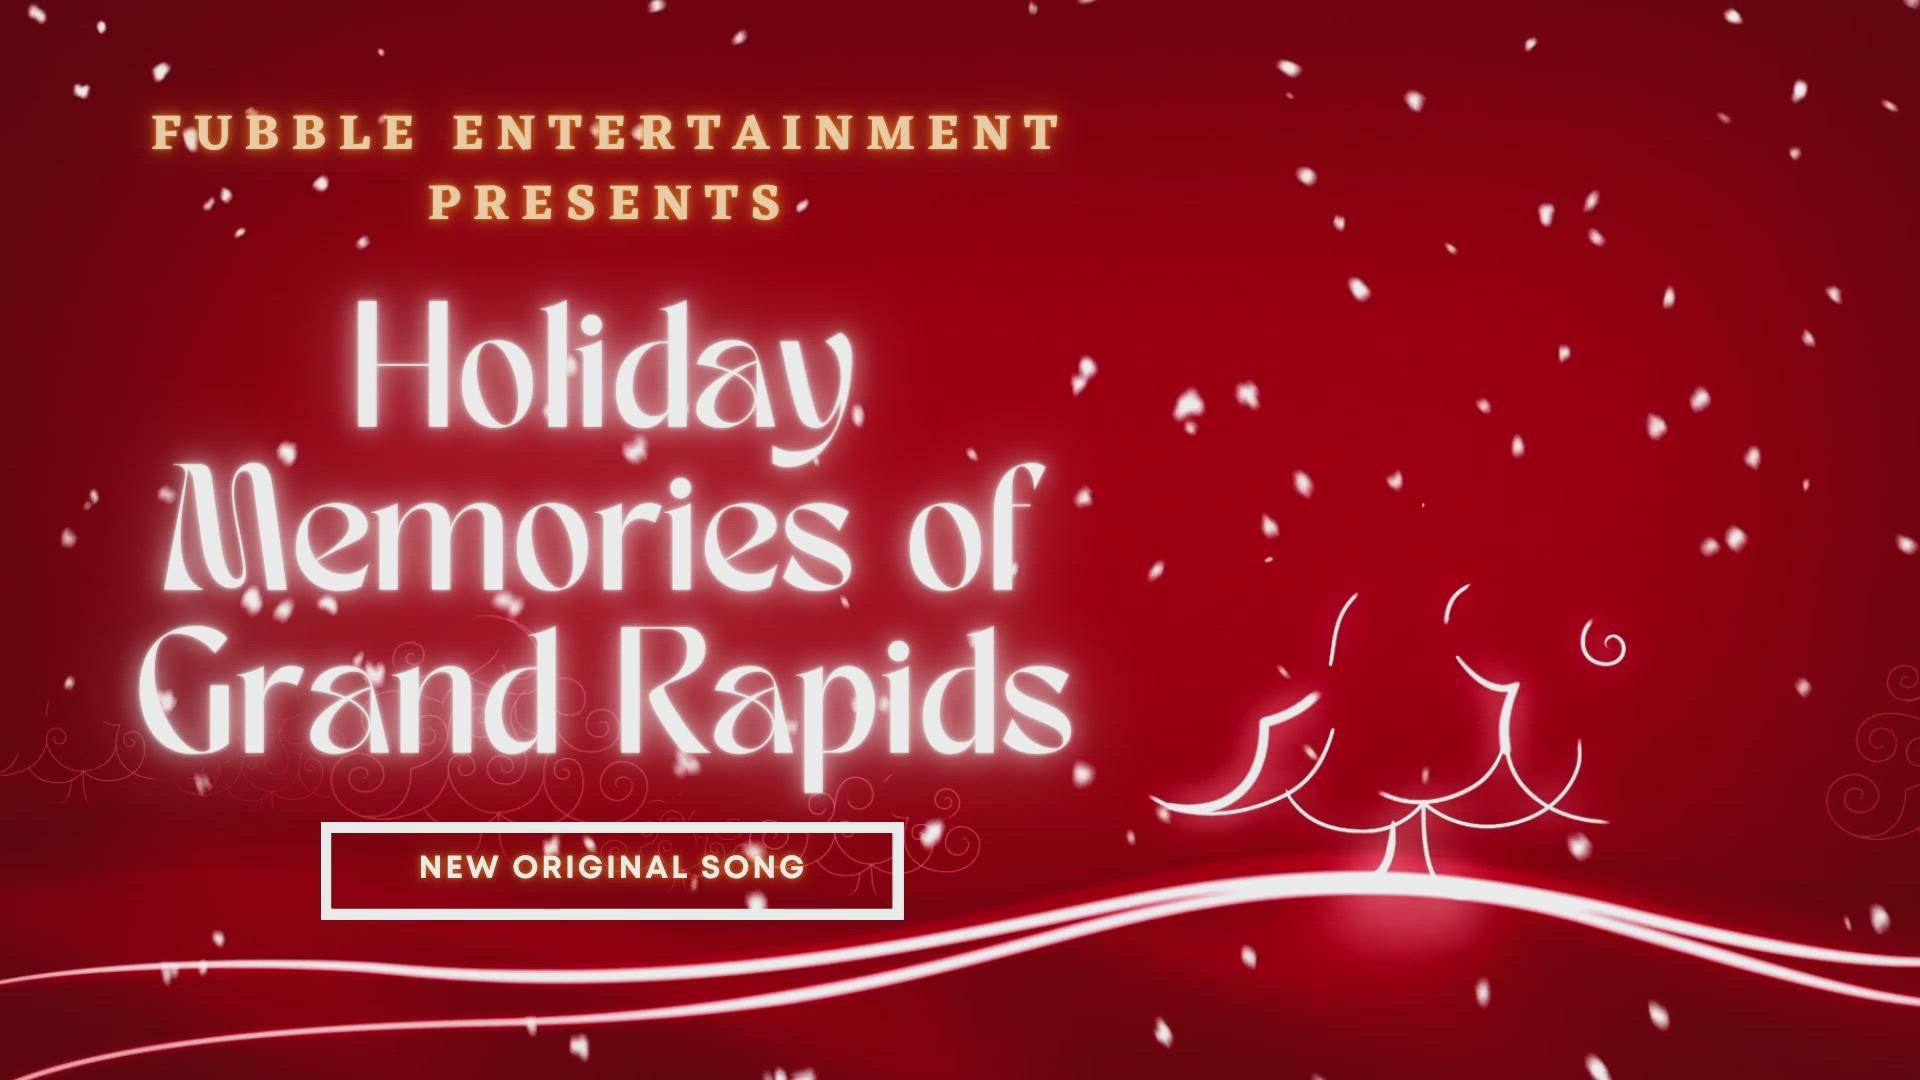 What's the best way to celebrate the holidays? With a song! A group of Grand Rapids locals came up with an original Christmas song to spread holiday cheer.